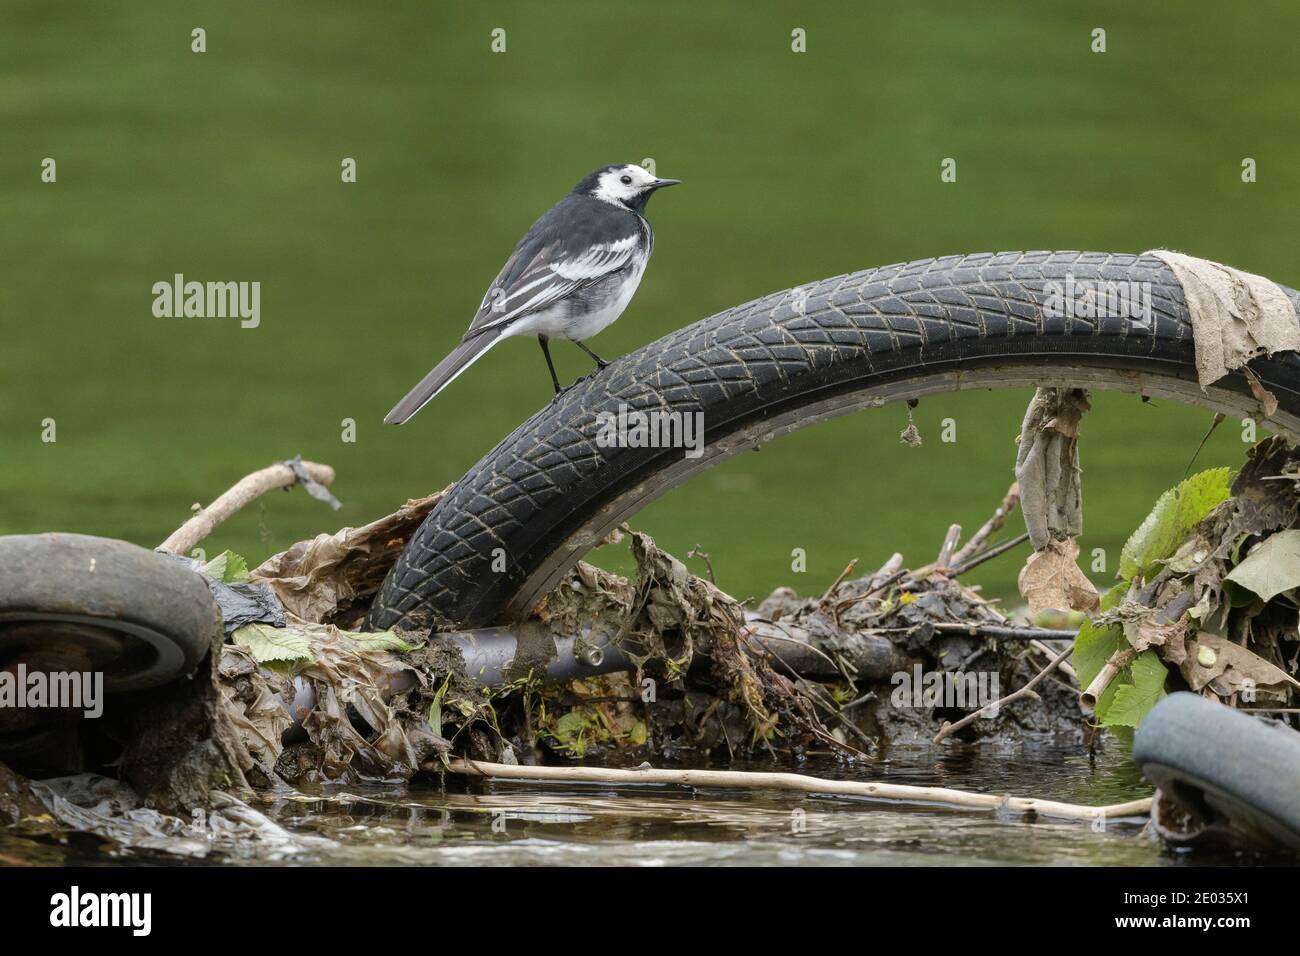 Pied wagtail (Motacilla alba) perched on bicycle wheel,  River Mersey, Greater Manchester, UK Stock Photo